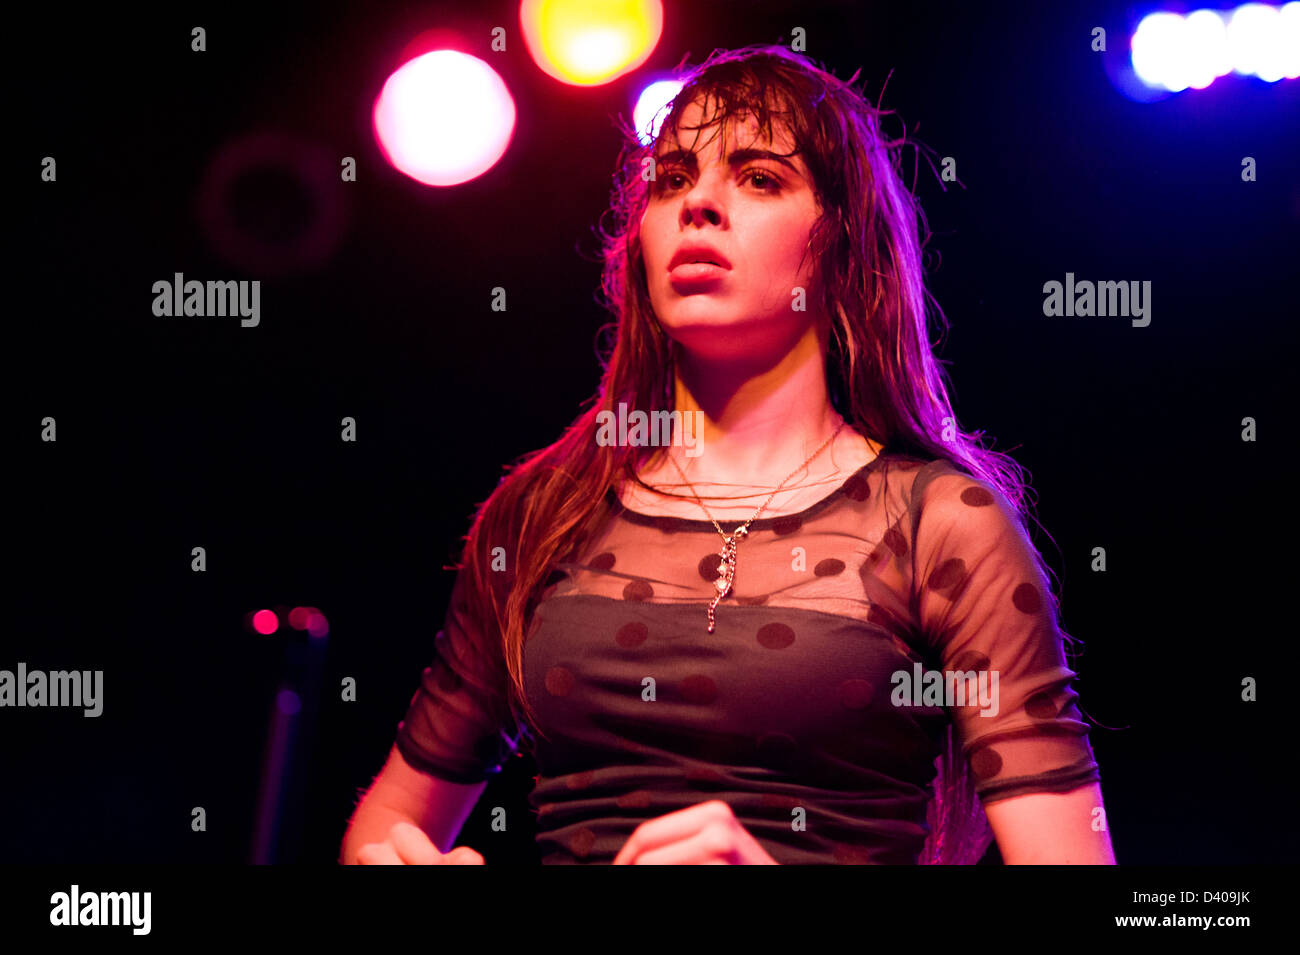 Teri Gender Bender performing with Bosnian Rainbows at Bottom Lounge in Chicago. Stock Photo